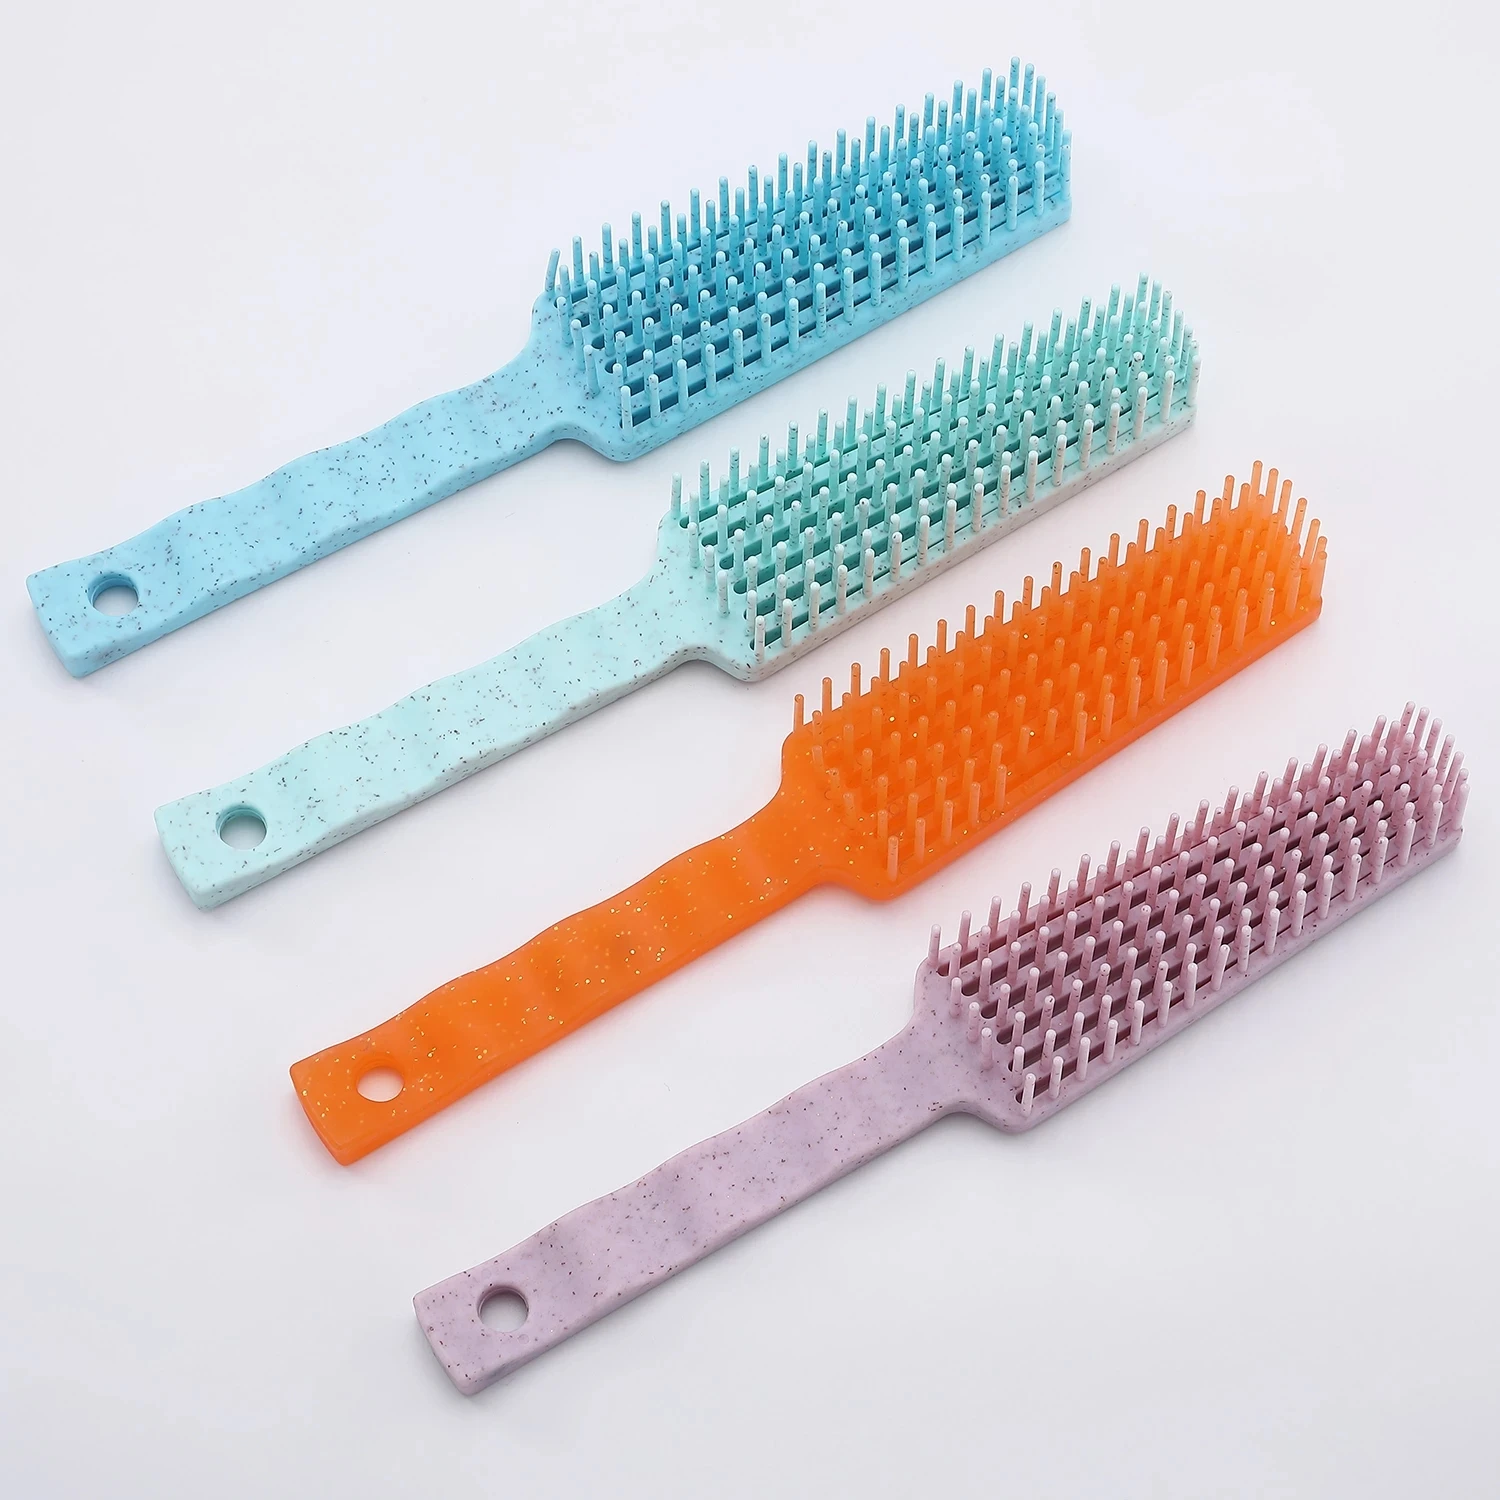 

YDM Detangling Brush Scalp Massage Comb Wheat Straw Ribs Comb Smoothing Hair Brush for Home Straight Hair Styling Tools, Blue, green, orange, purple